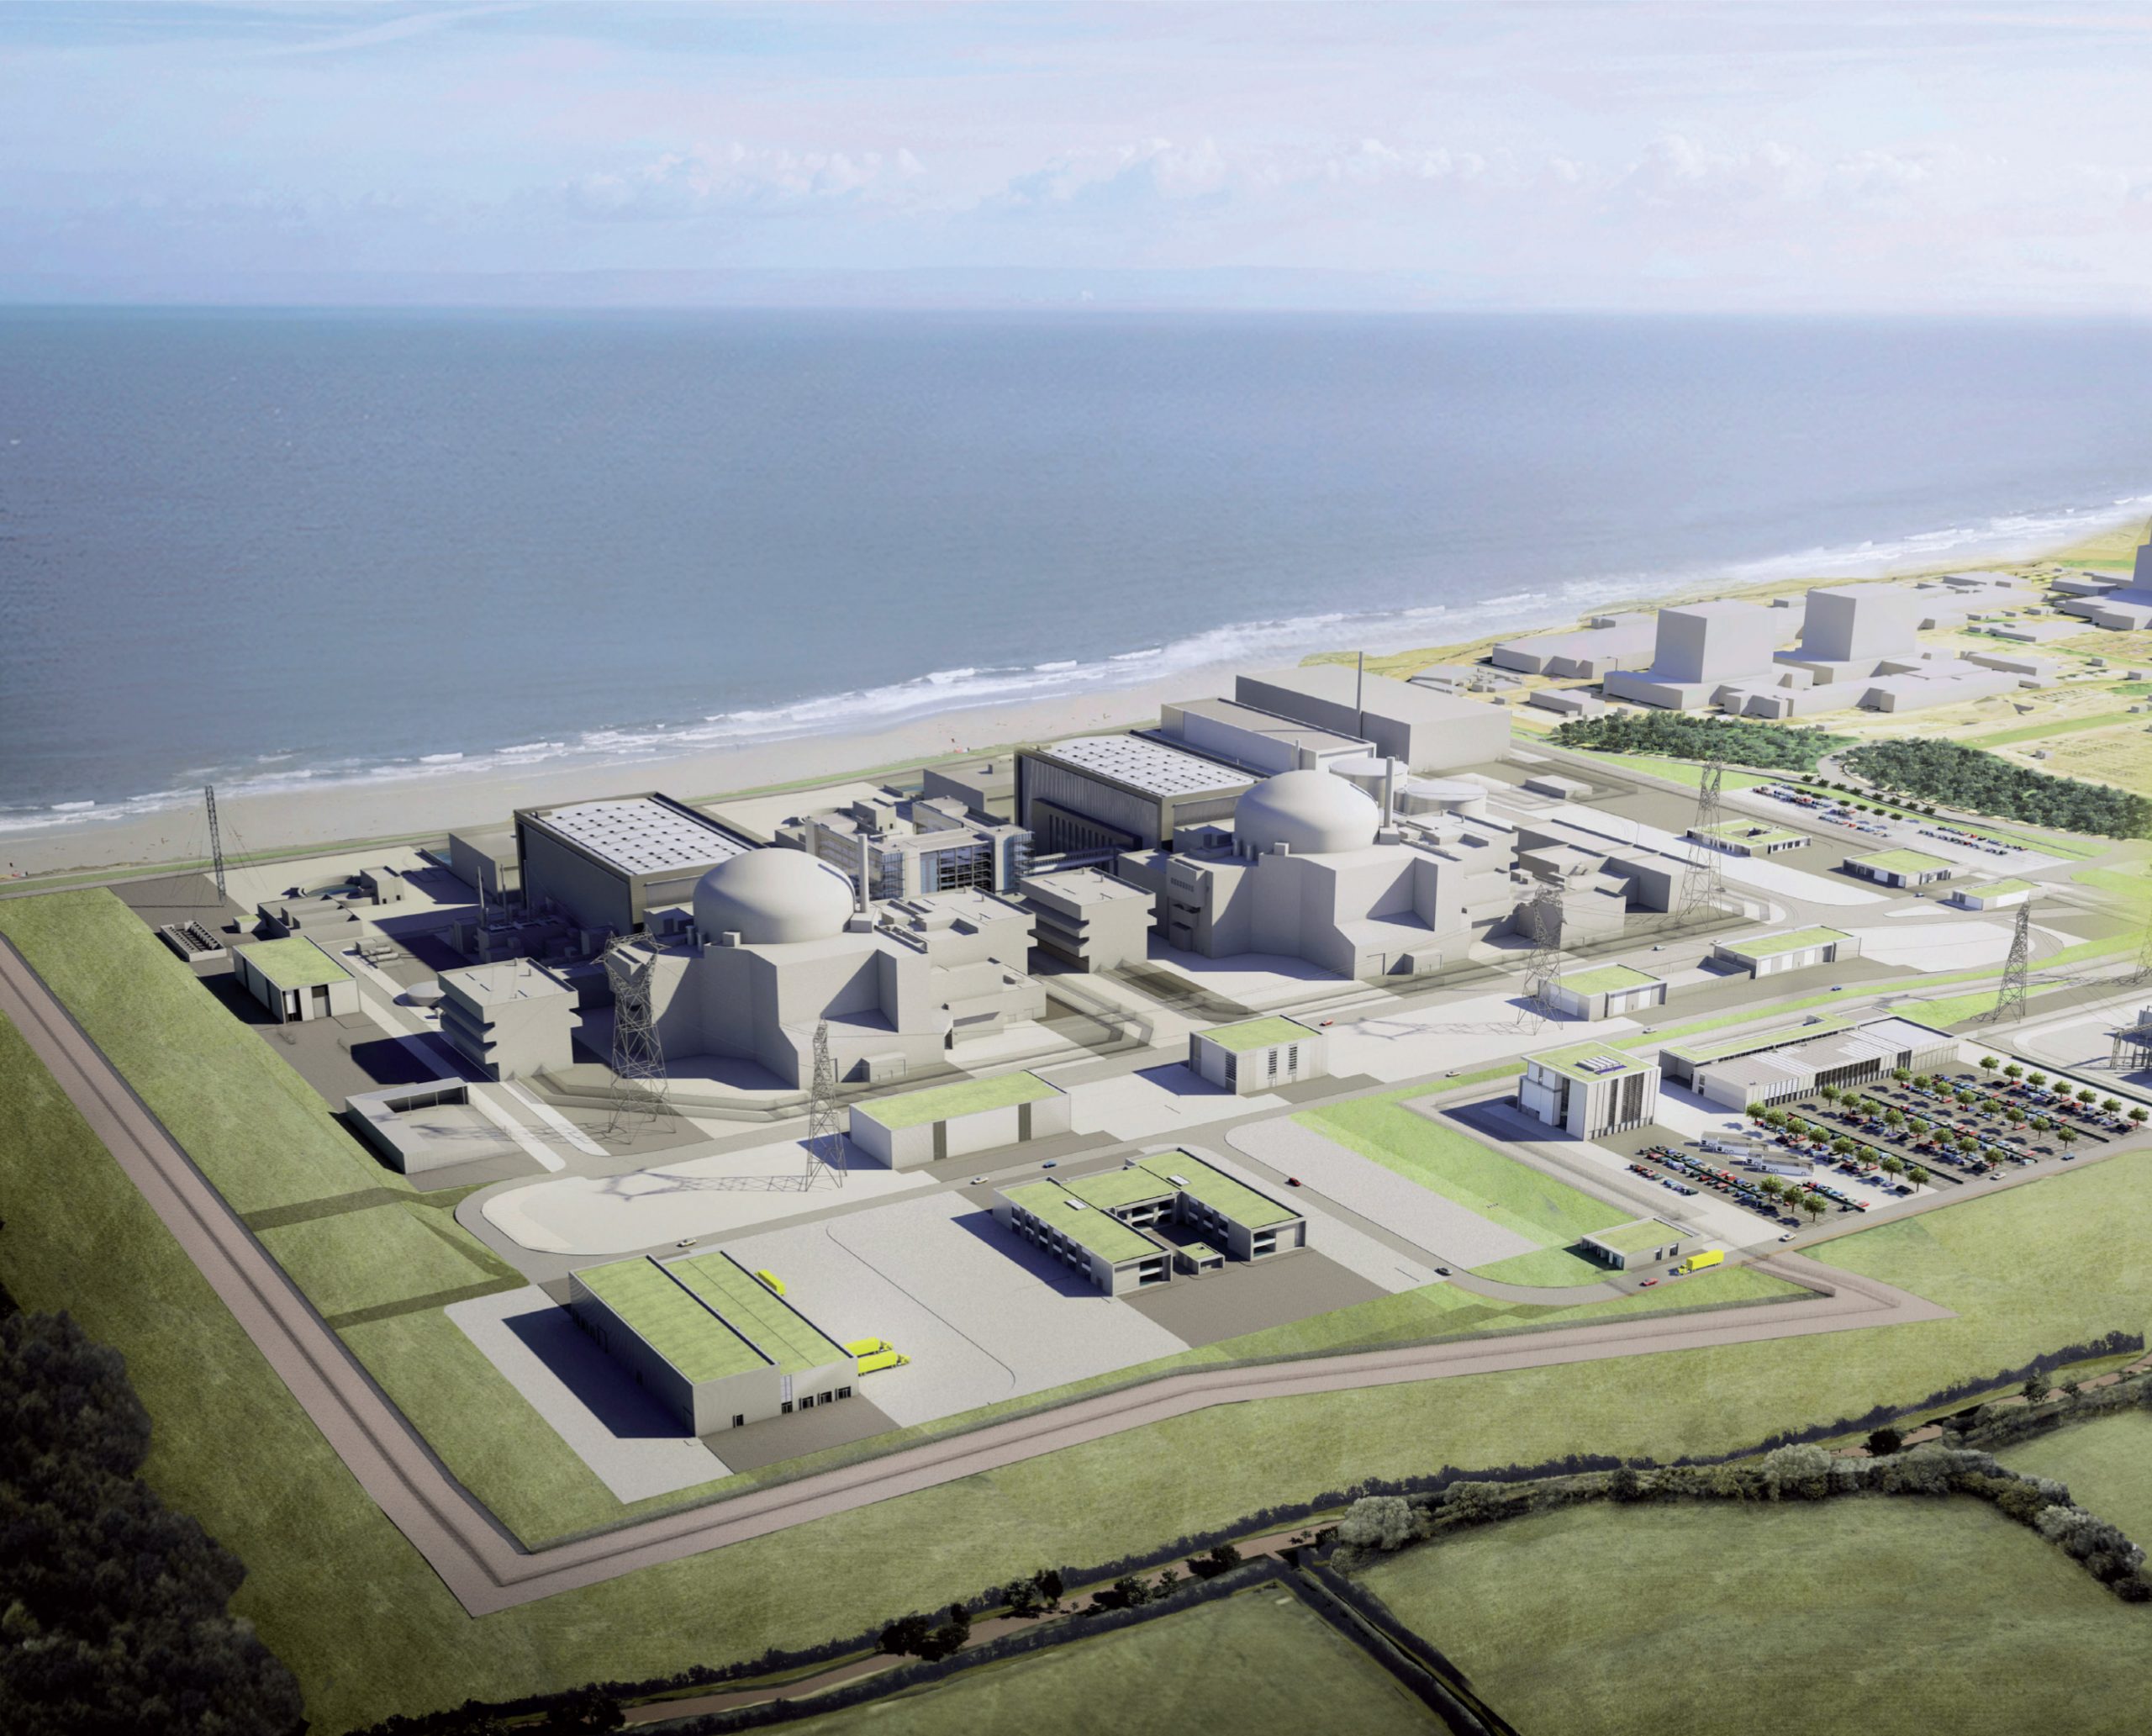 rendering of HPC nuclear station from a sky-view